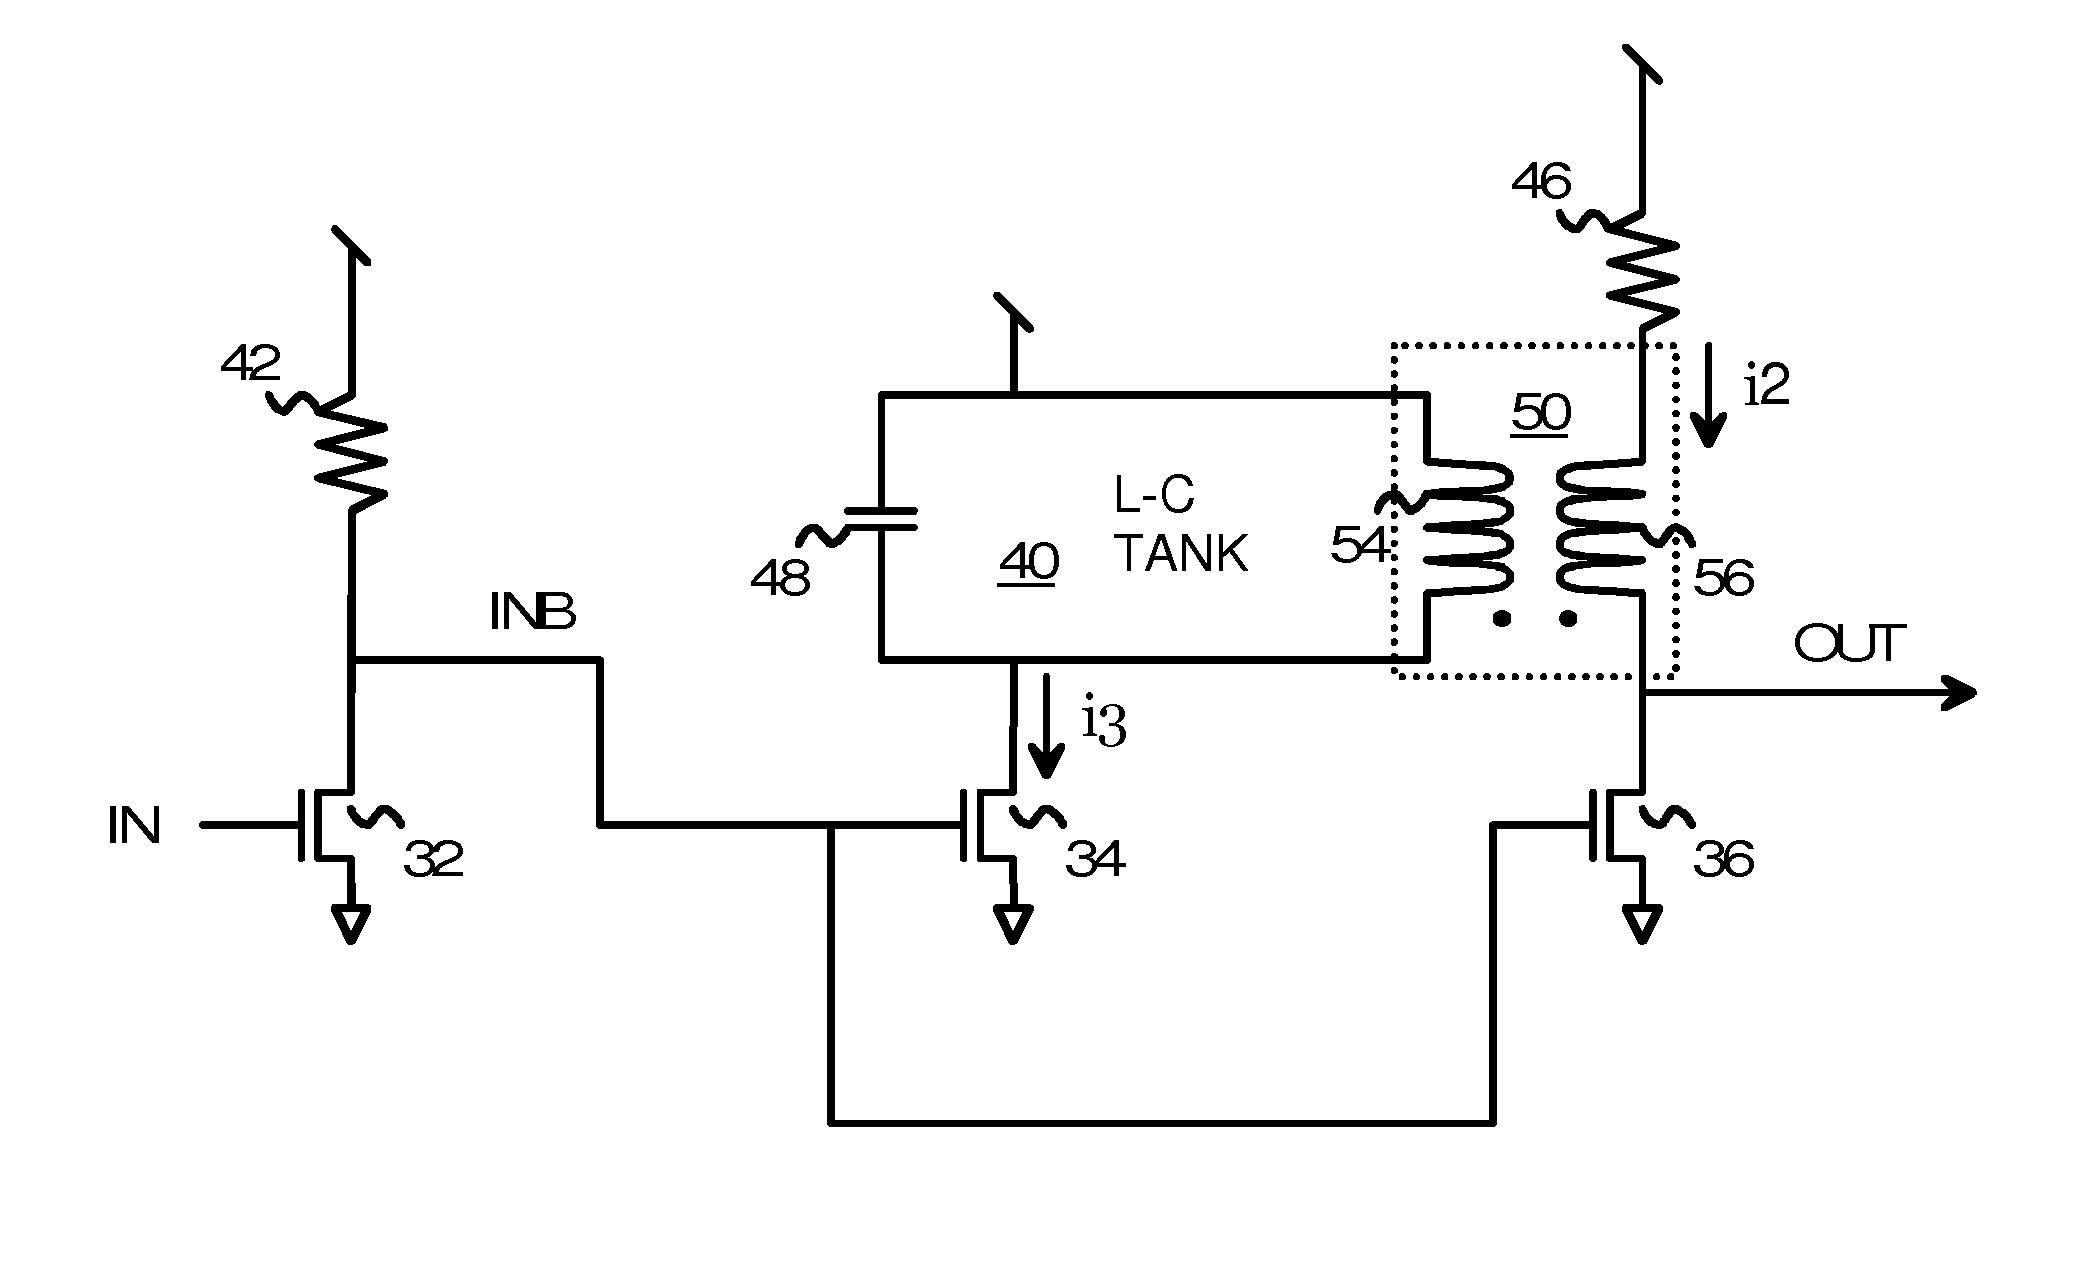 Re-driver with pre-emphasis injected through a transformer and tuned by an L-C tank